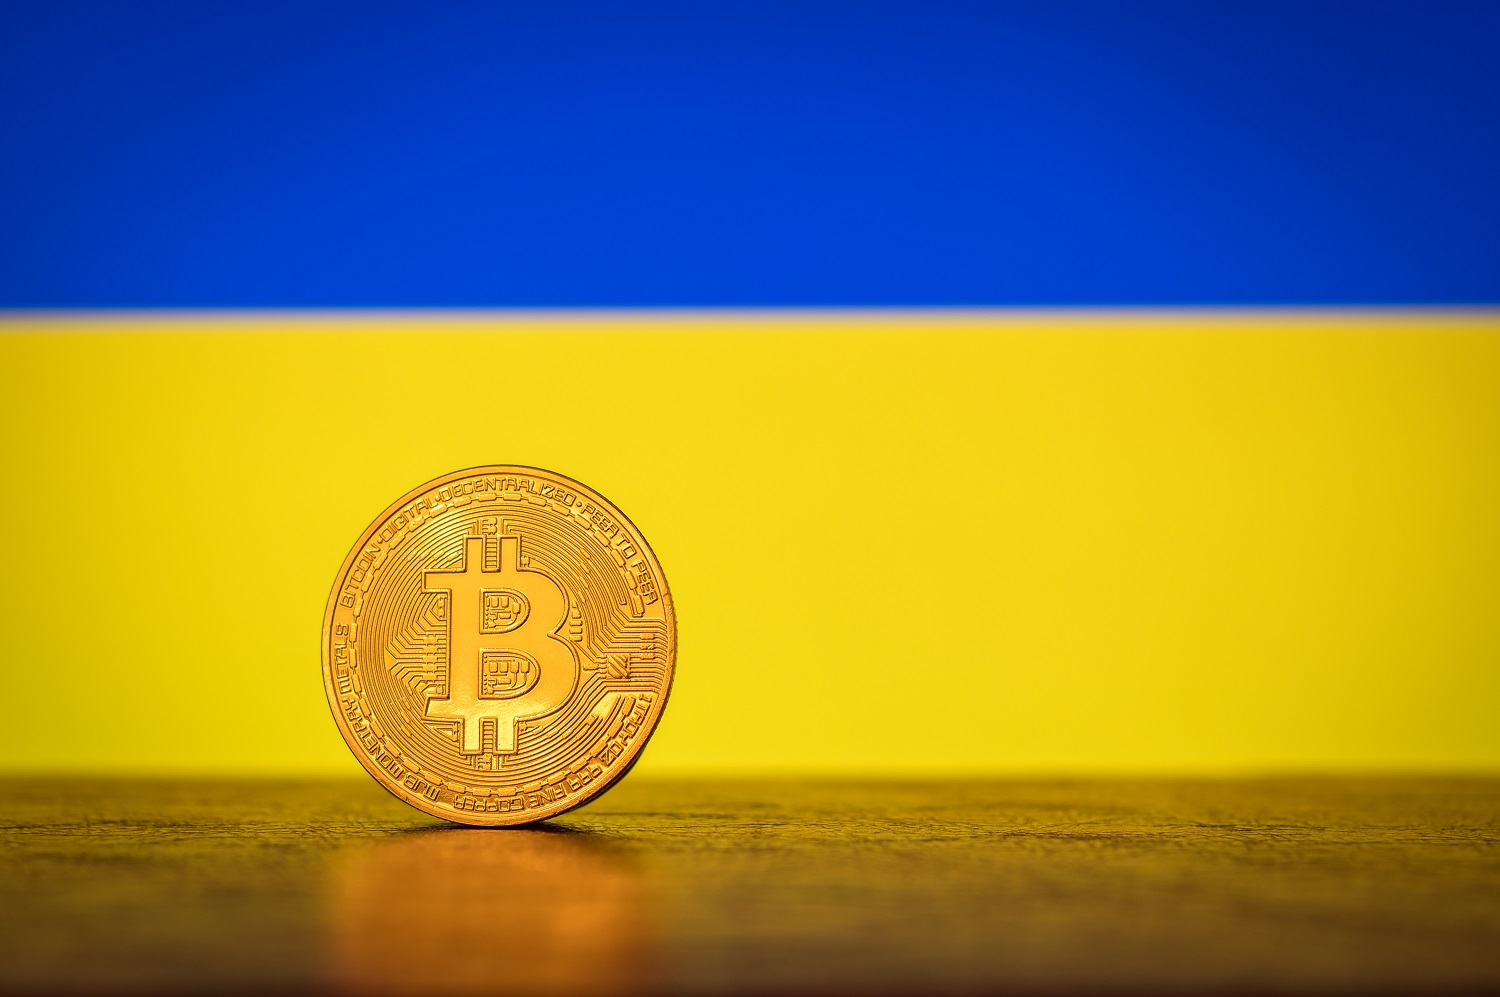 A metal coin intended to represent Bitcoin on a wooden table with their Ukrainian flag in the background.